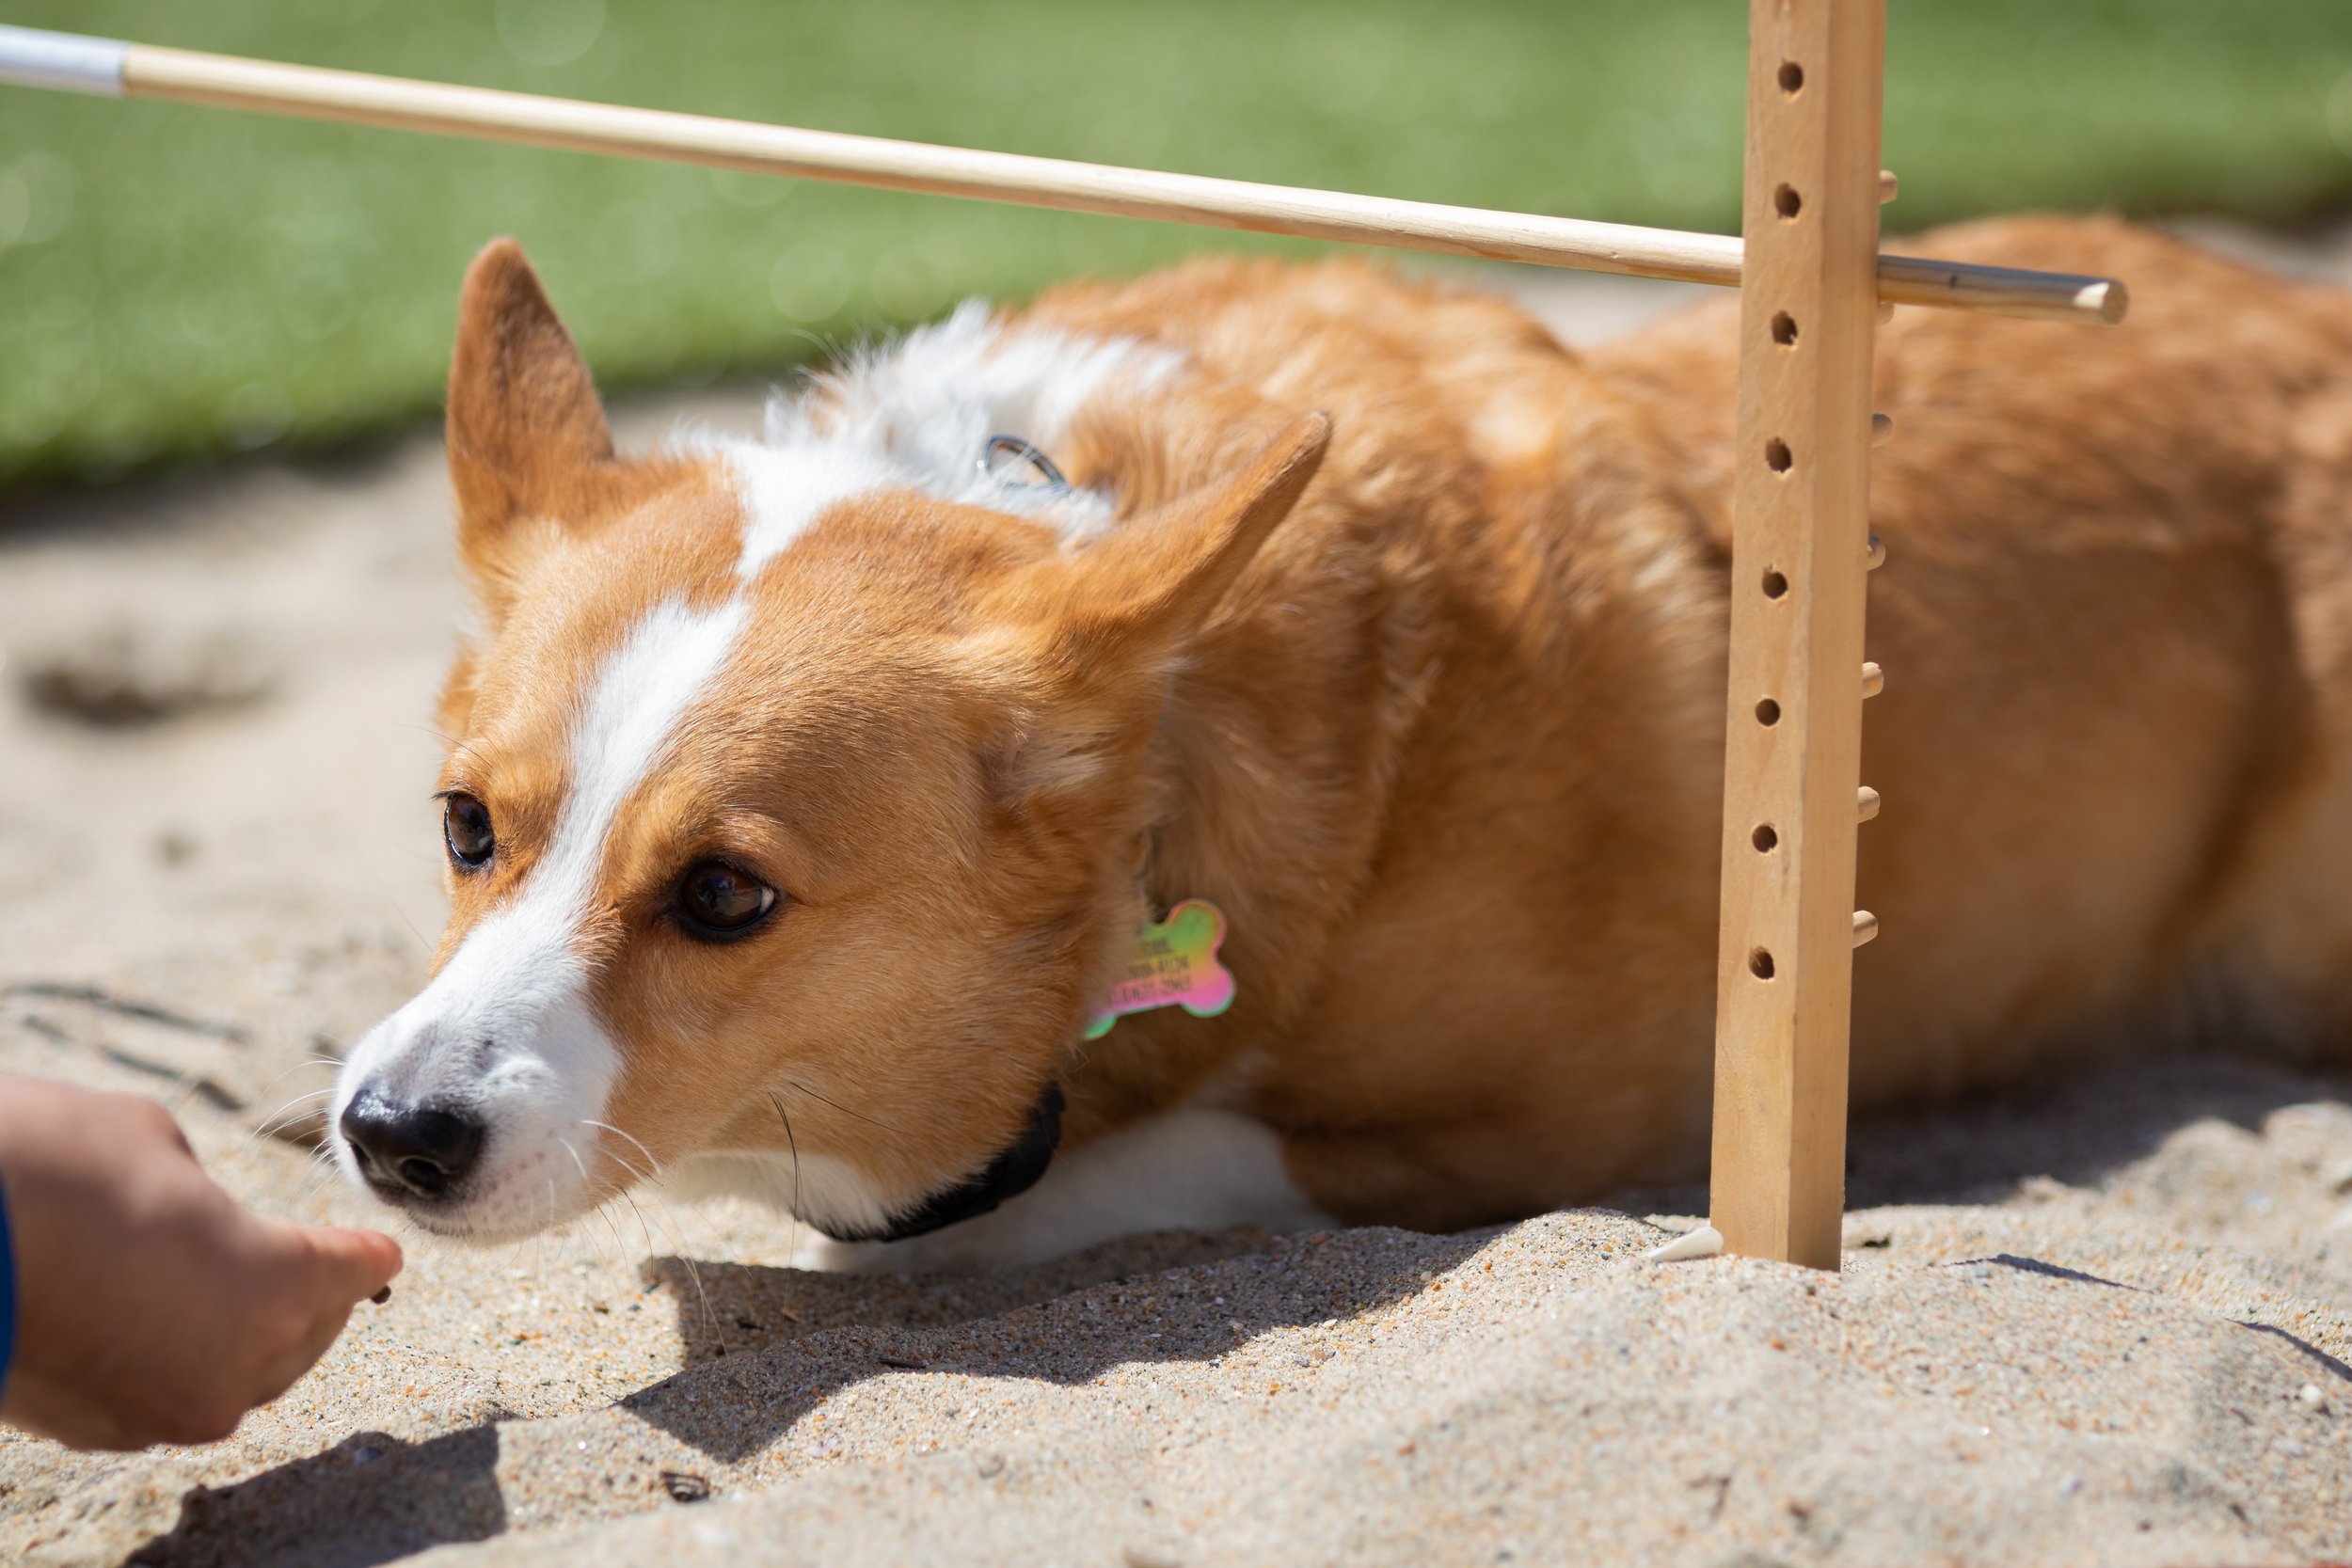  A corgi attempts to 'limbo' for the Corgi Limbo Contest during Corgi Beach Day at Huntington Dog Beach, Huntington Beach, Calif., on Saturday, April 1, 2023. There were over a thousand people in attendance with over 100 Corgis competing. (Caylo Seal